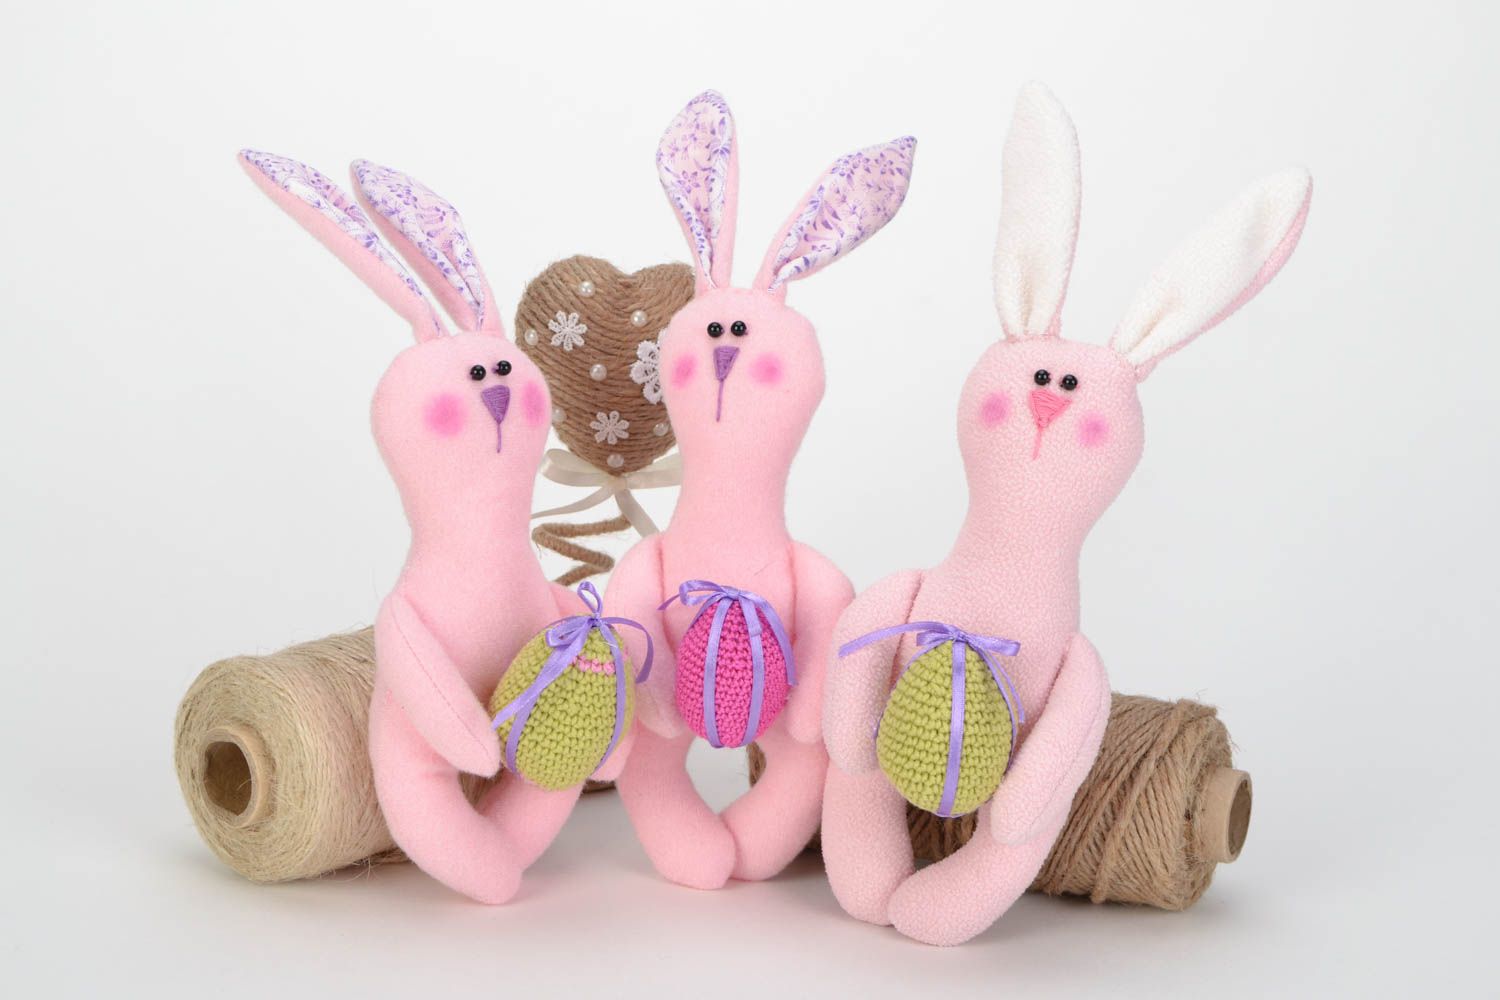 Set of handmade fabric toys Bunnies 3 pieces beautiful pink fleece toys with eggs photo 1